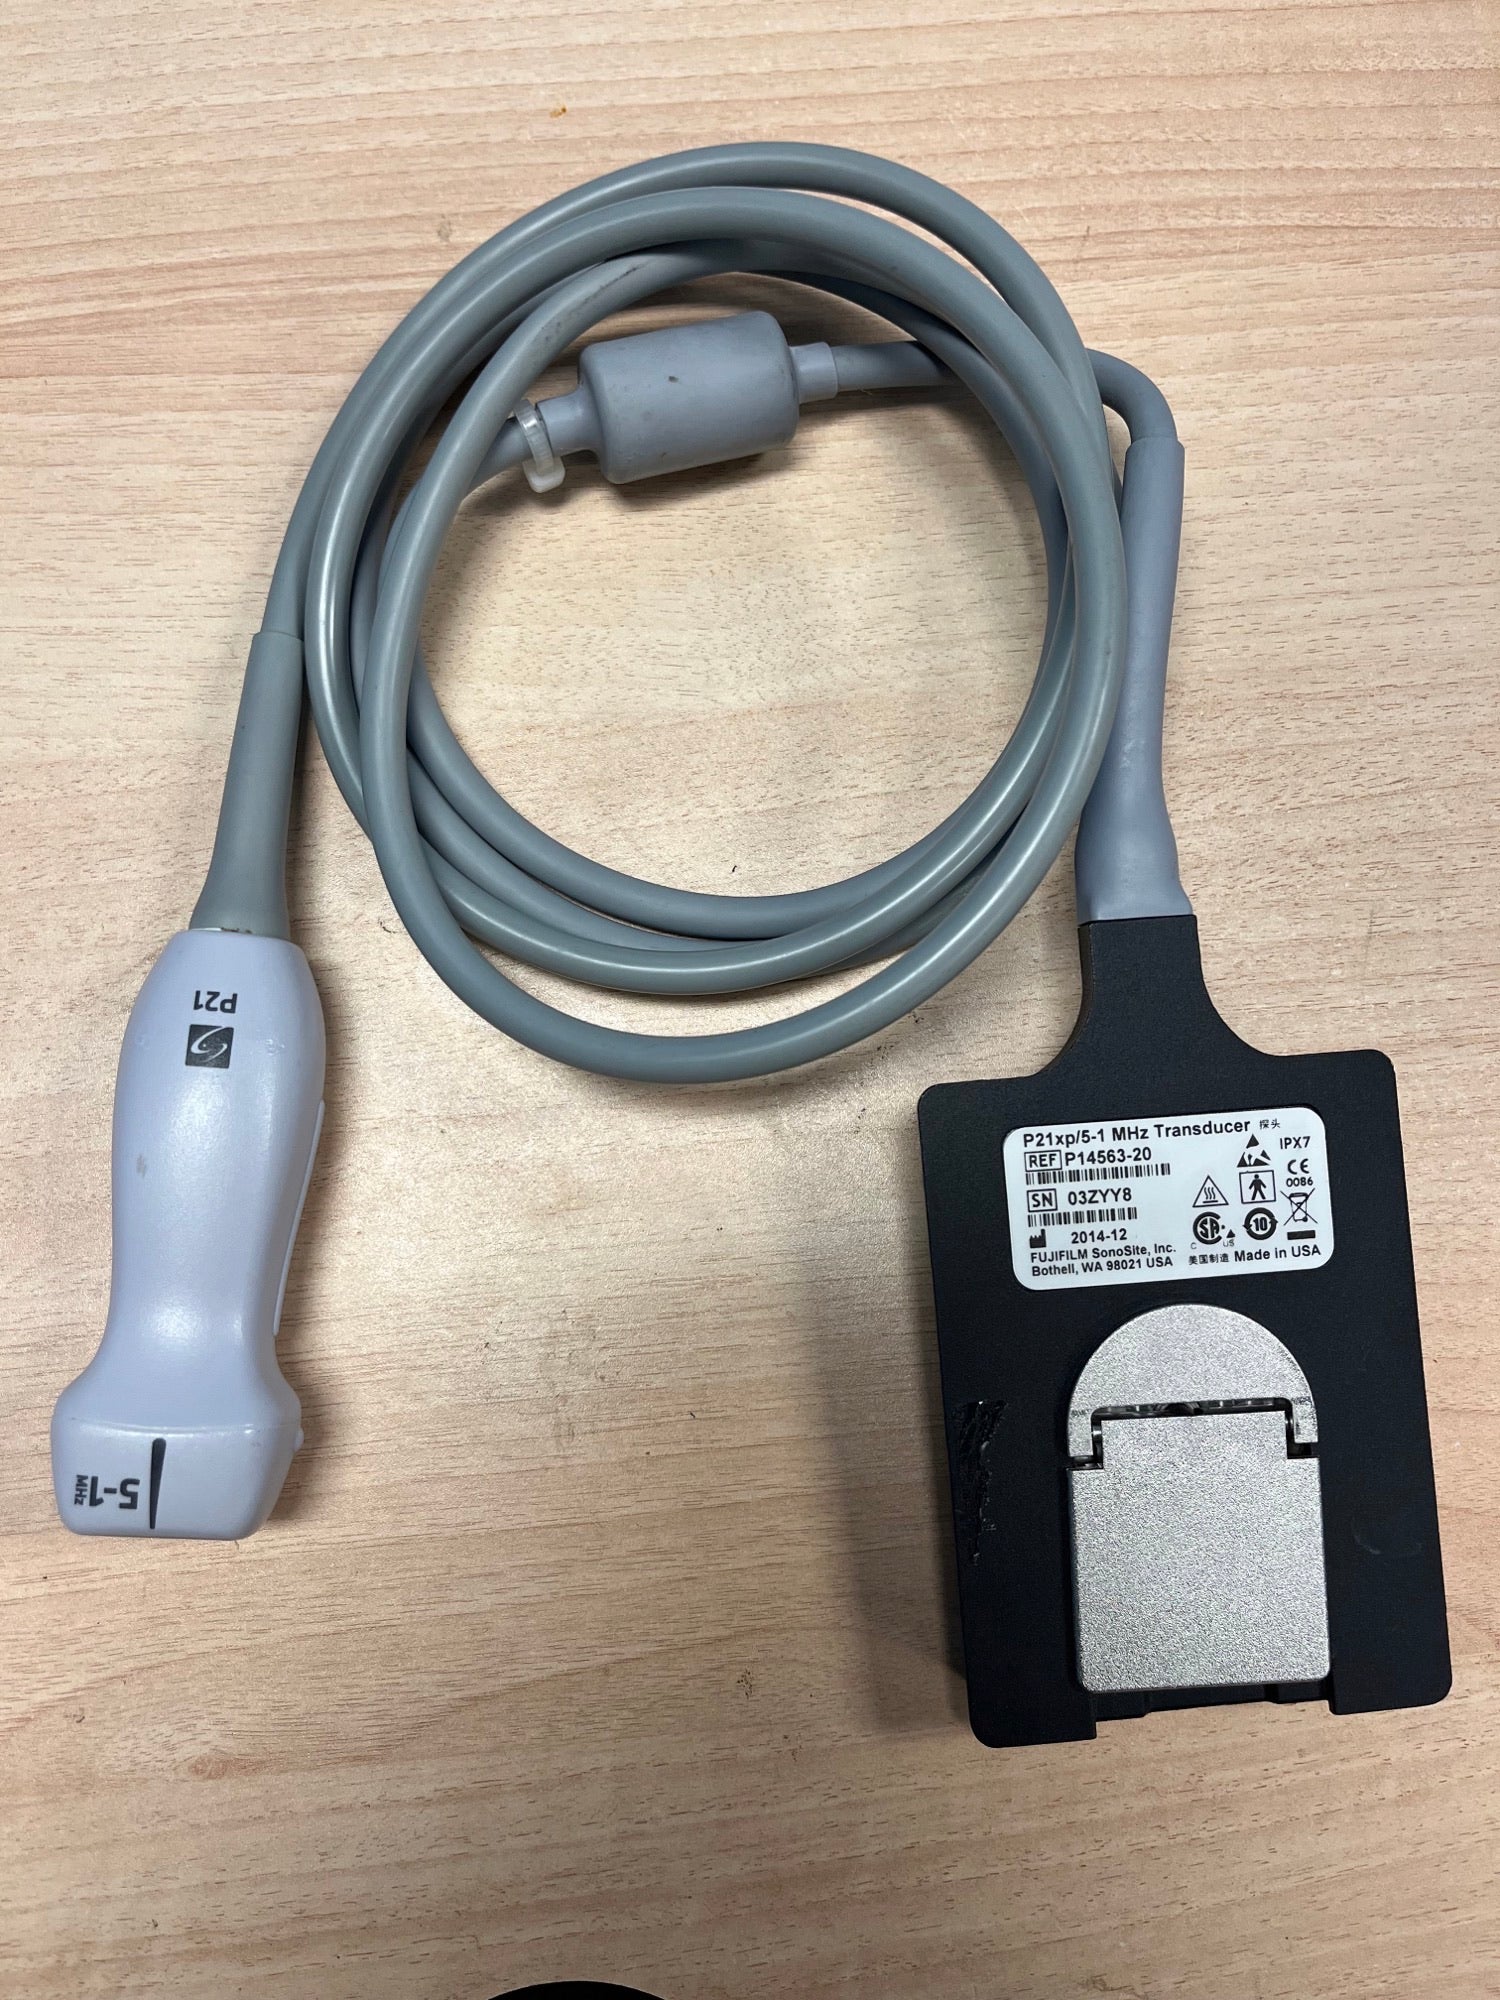 SonoSite P21Xp Phased Array Probe Transducer for X-Porte DOM 2014 DIAGNOSTIC ULTRASOUND MACHINES FOR SALE